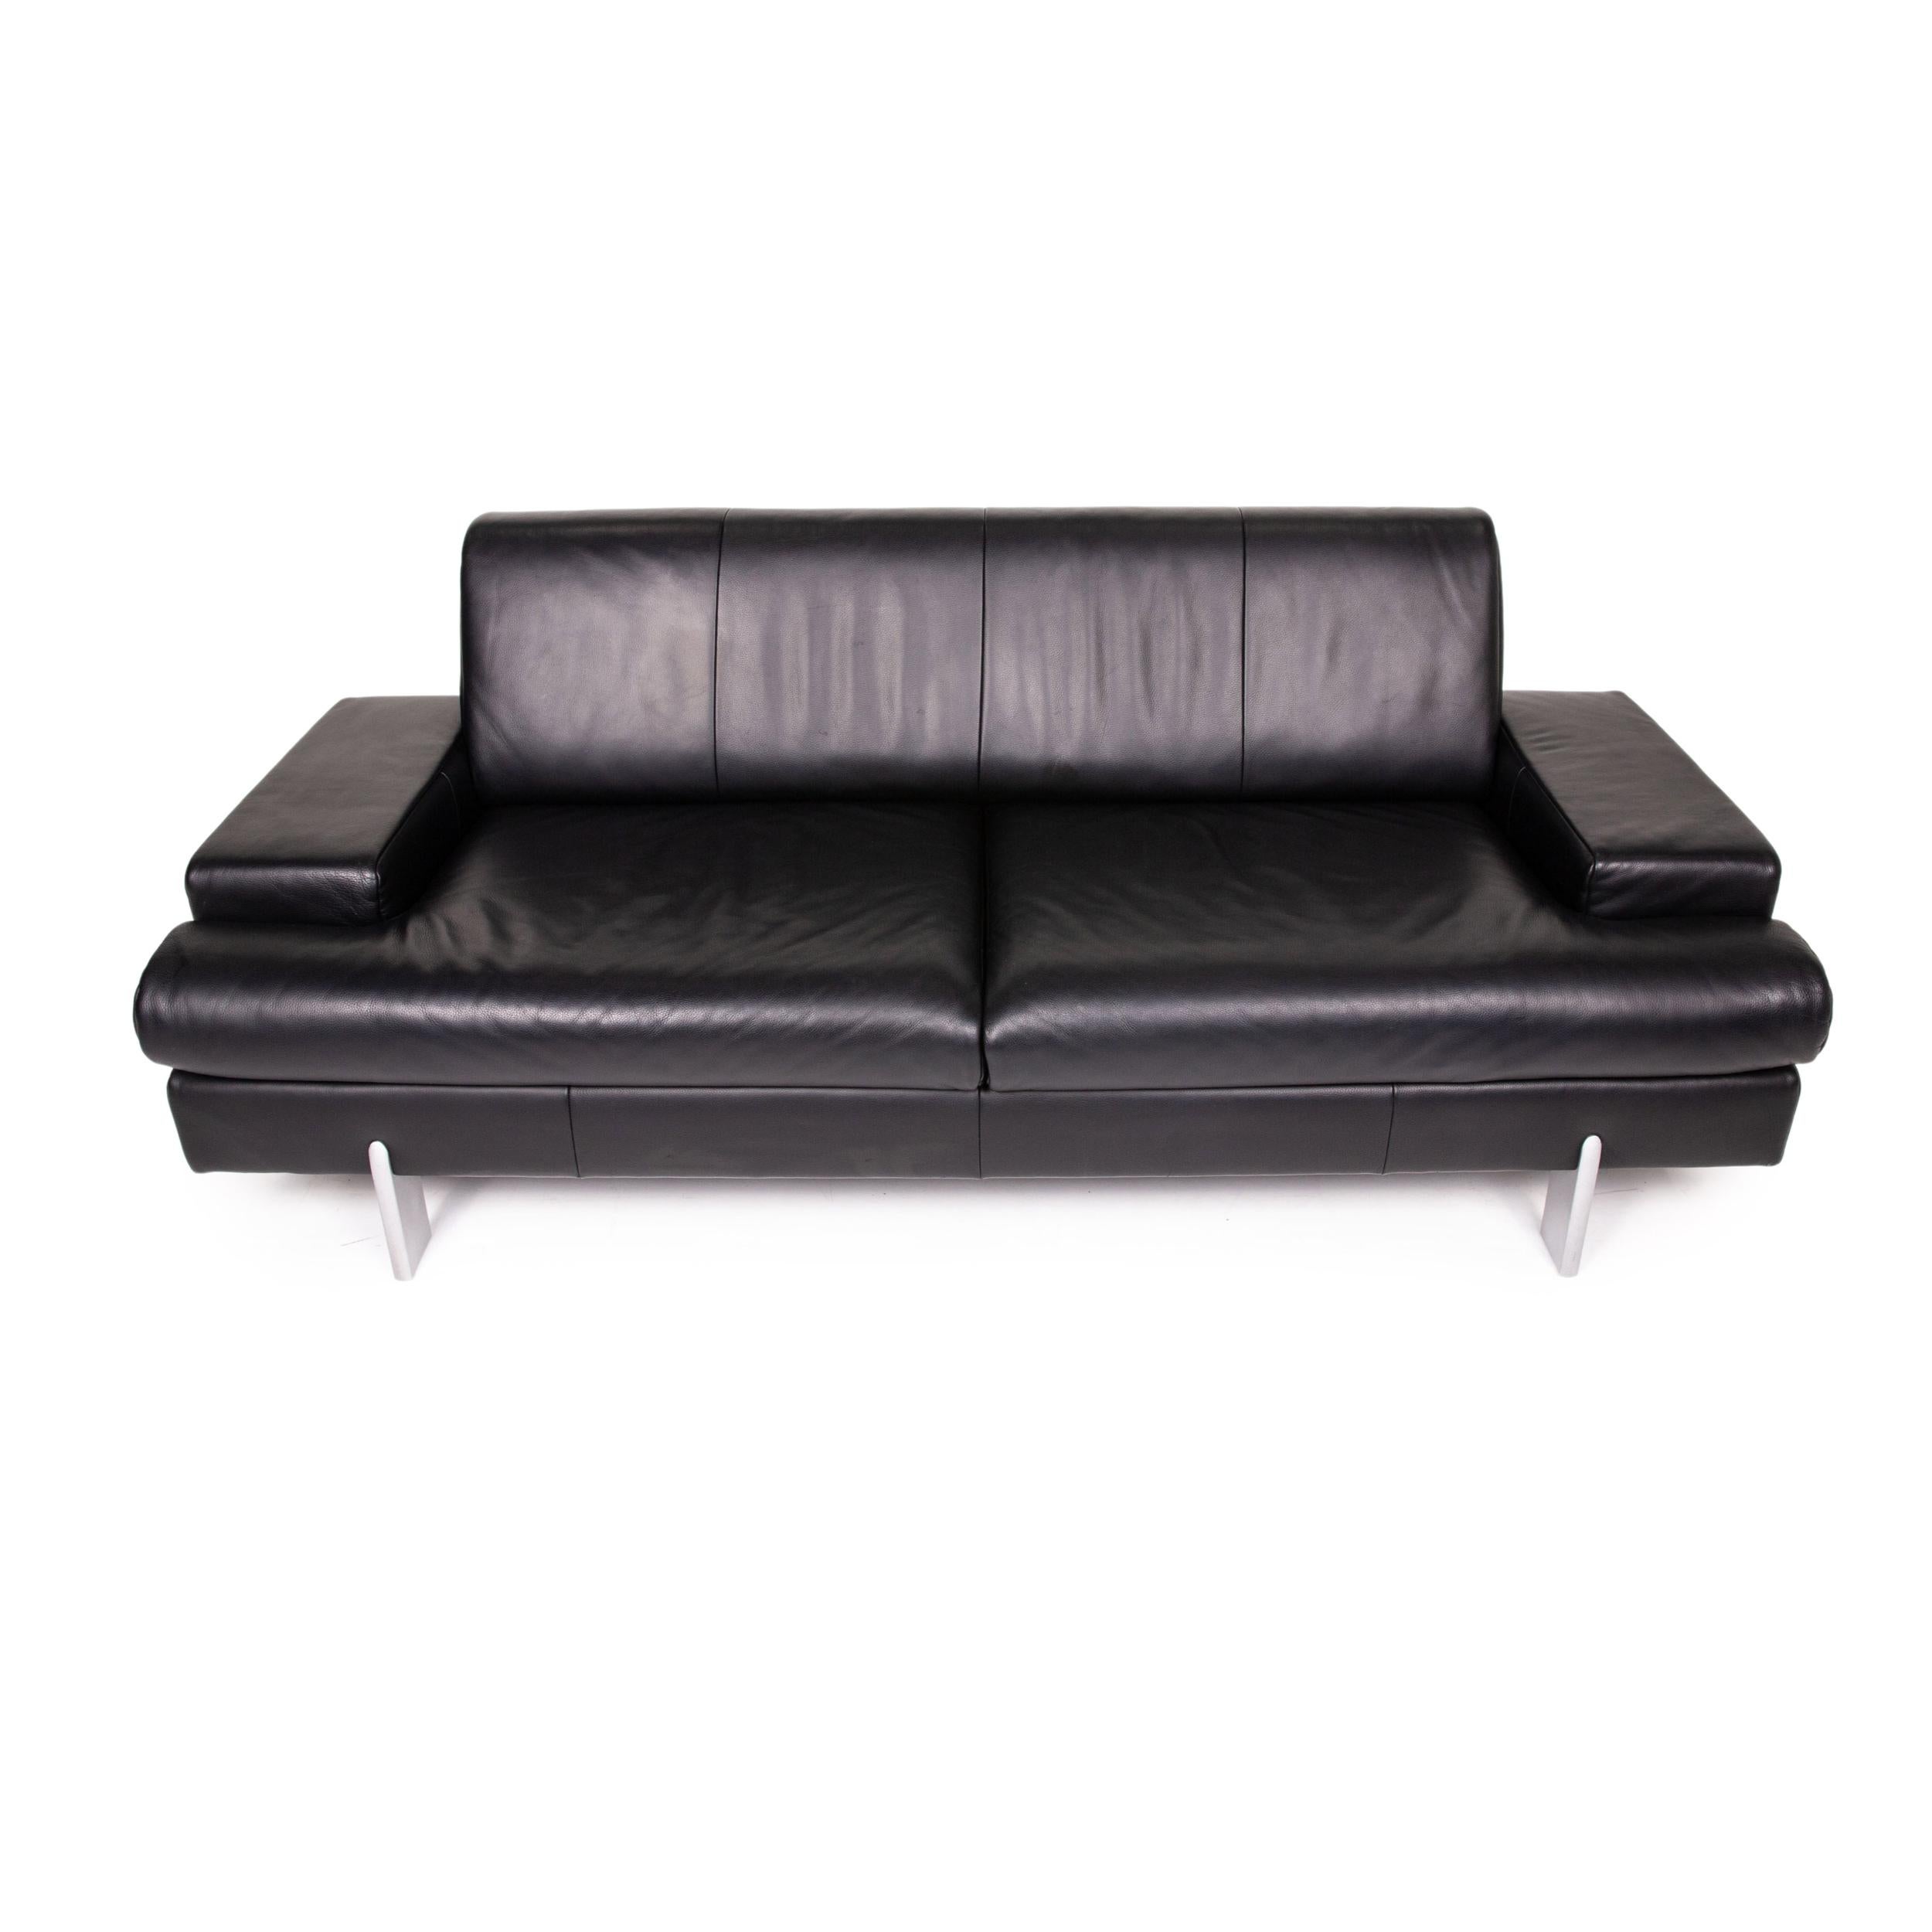 Rolf Benz AK 644 Leather Sofa Black Three-Seater Couch 1